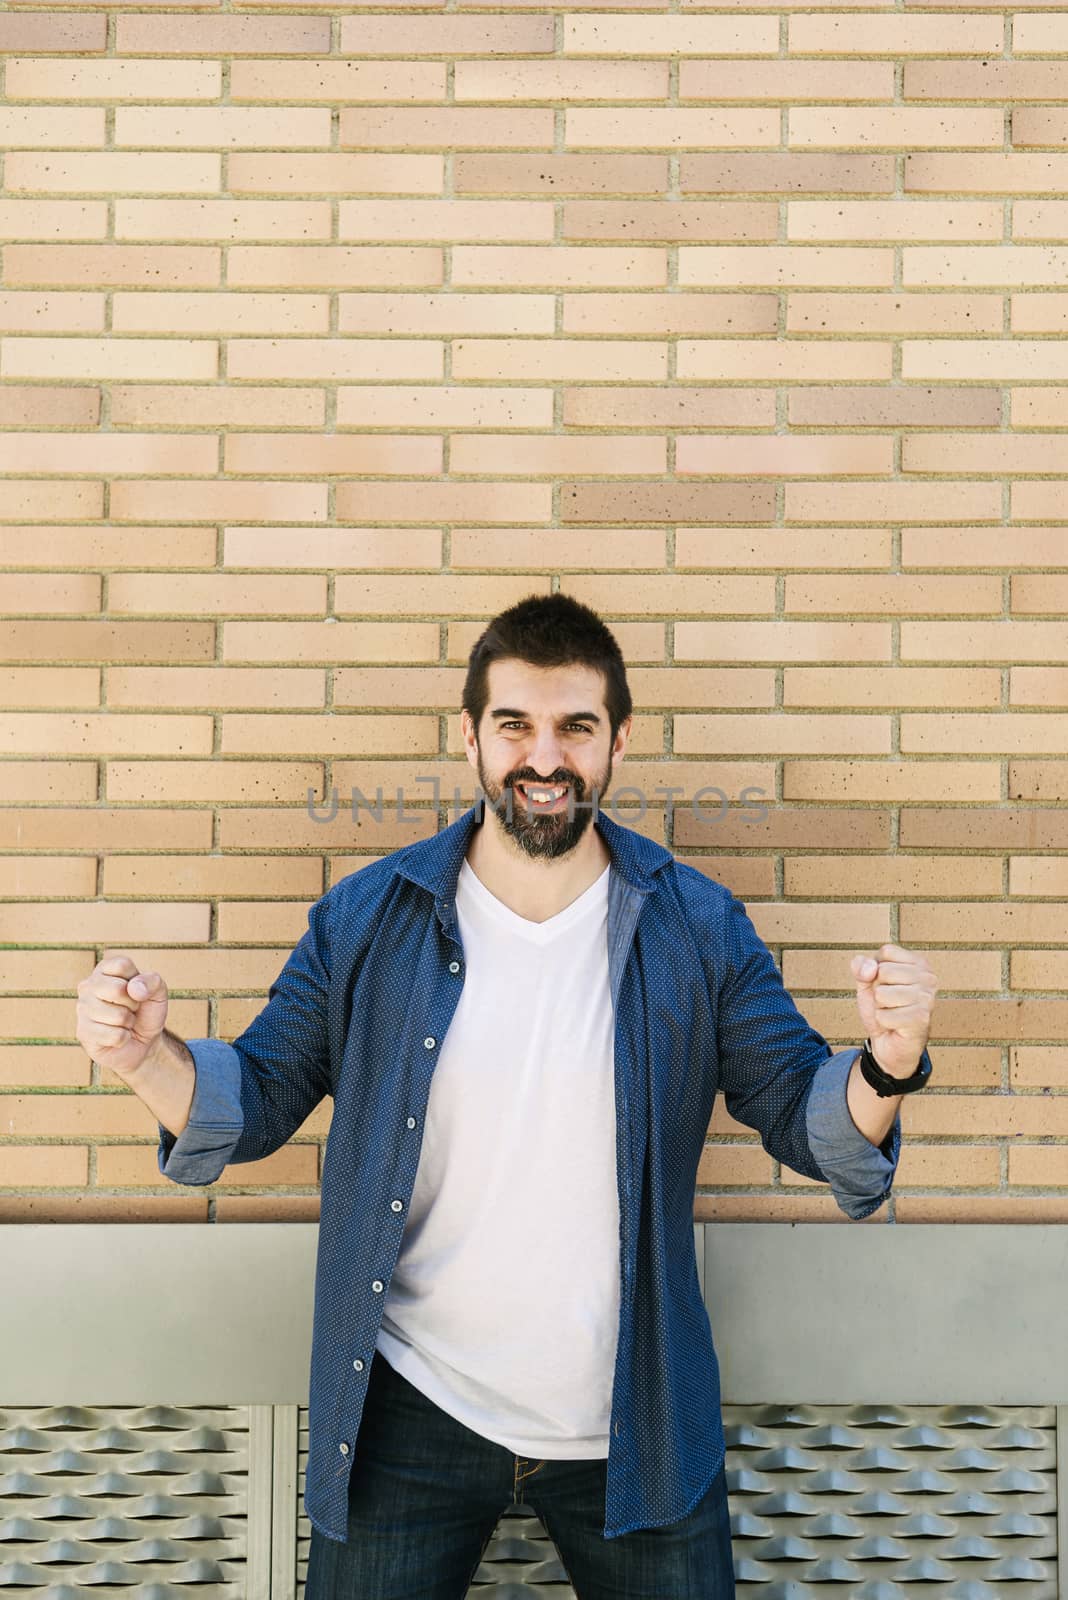 Joyful young bearded man in casual blue shirt posing on bricked wall background. by raferto1973